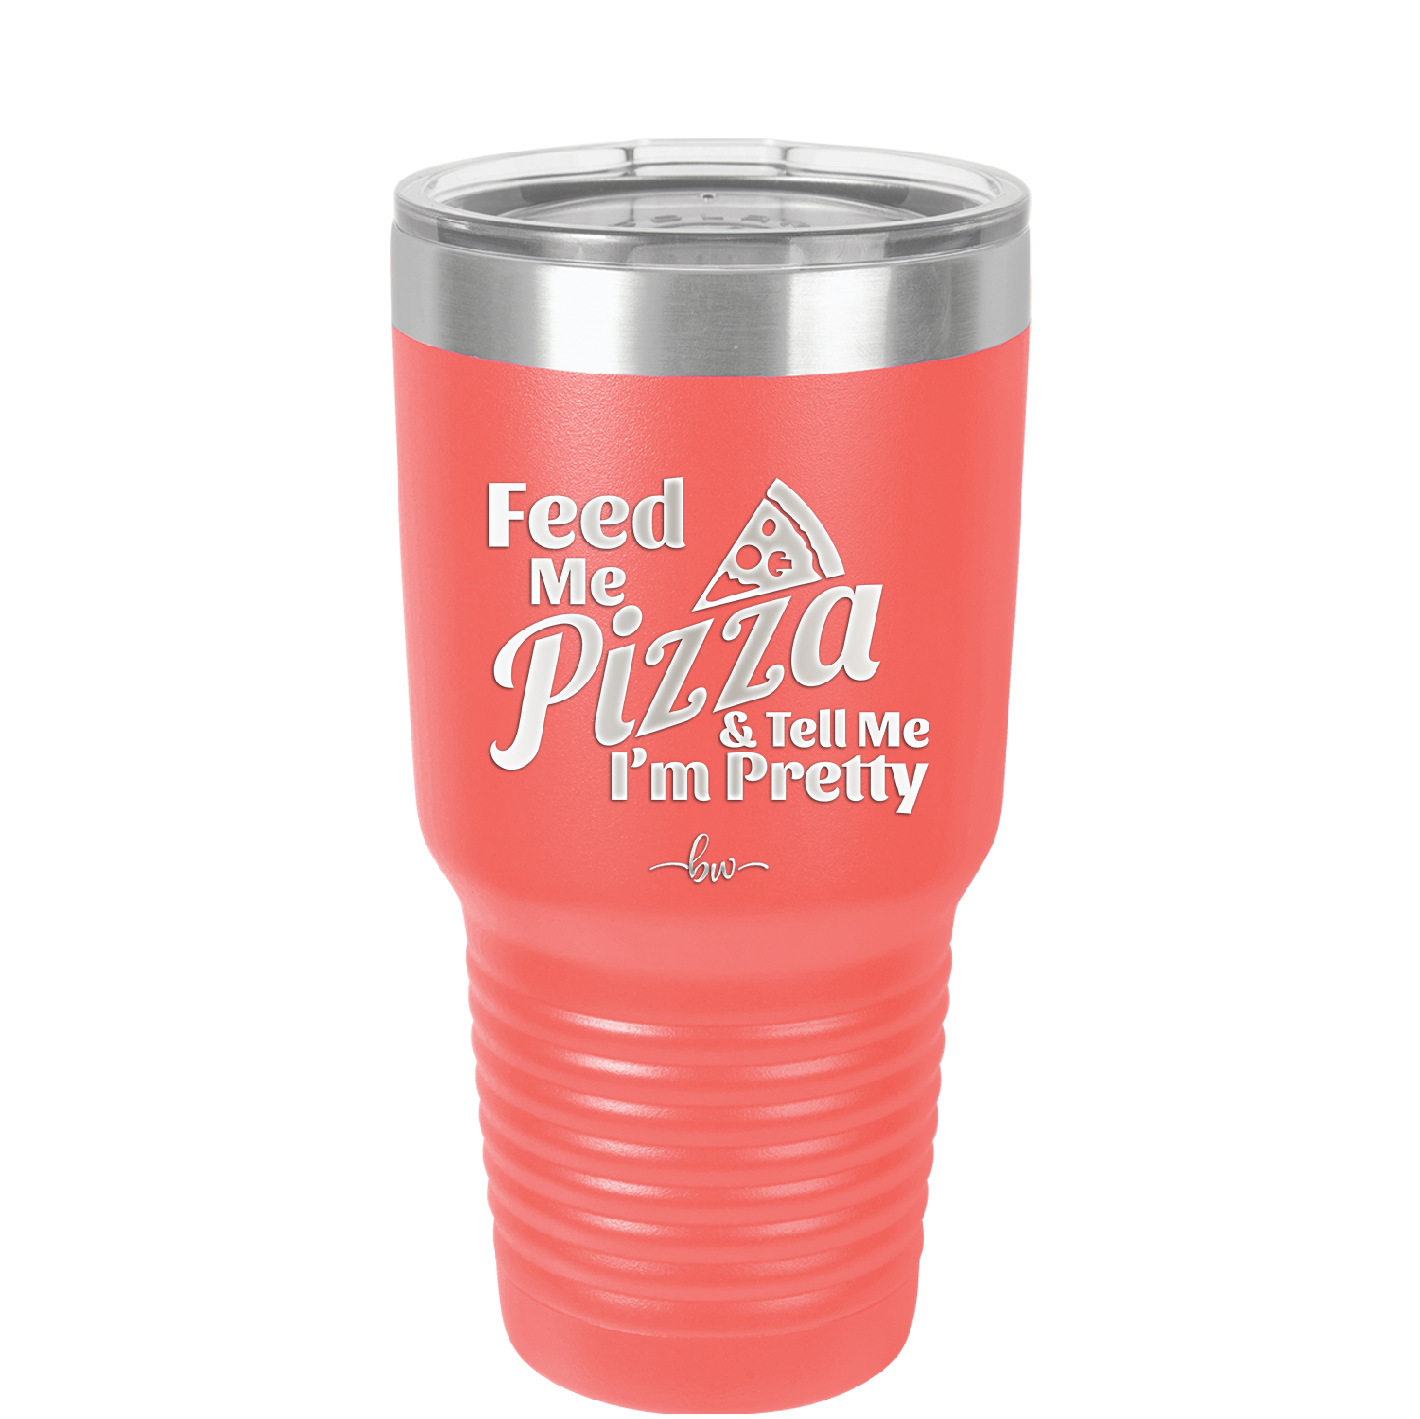 Feed Me Pizza and Tell Me I'm Pretty - Laser Engraved Stainless Steel Drinkware - 2504 -